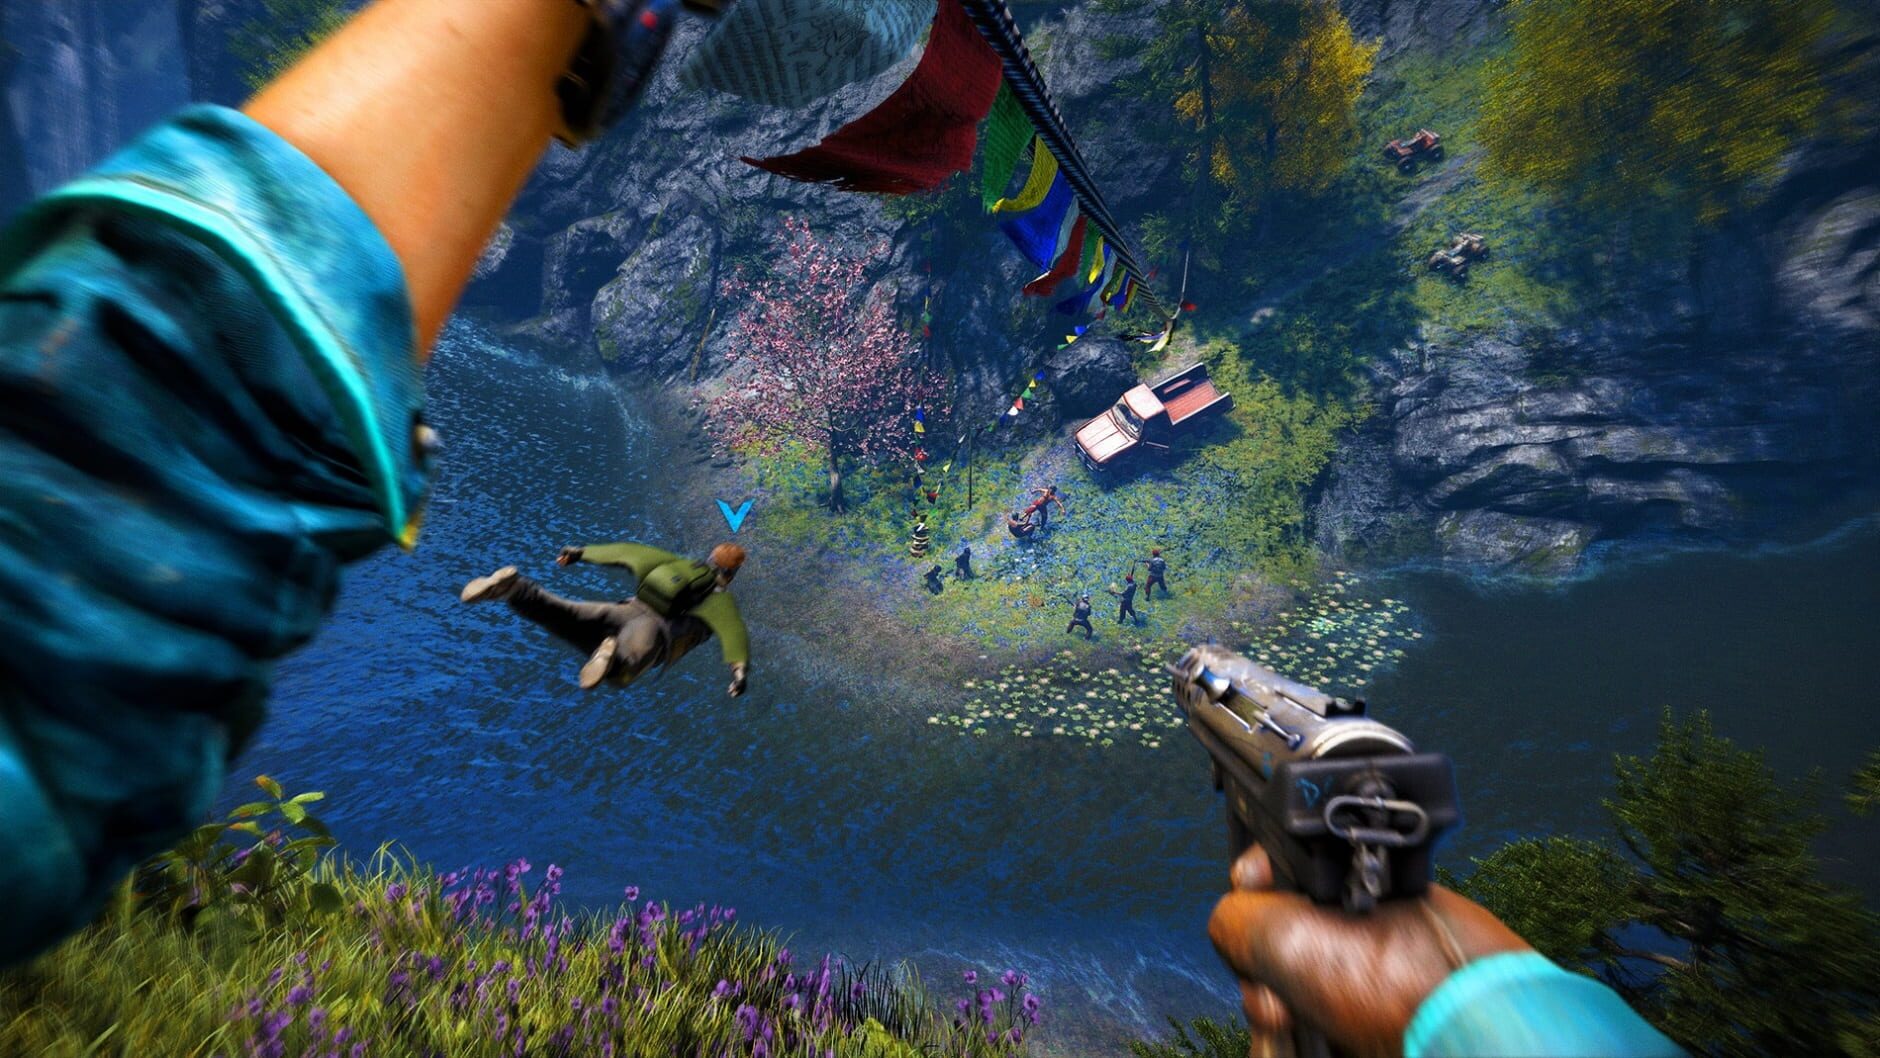 Screenshot for Far Cry 4: Hurk Deluxe Pack